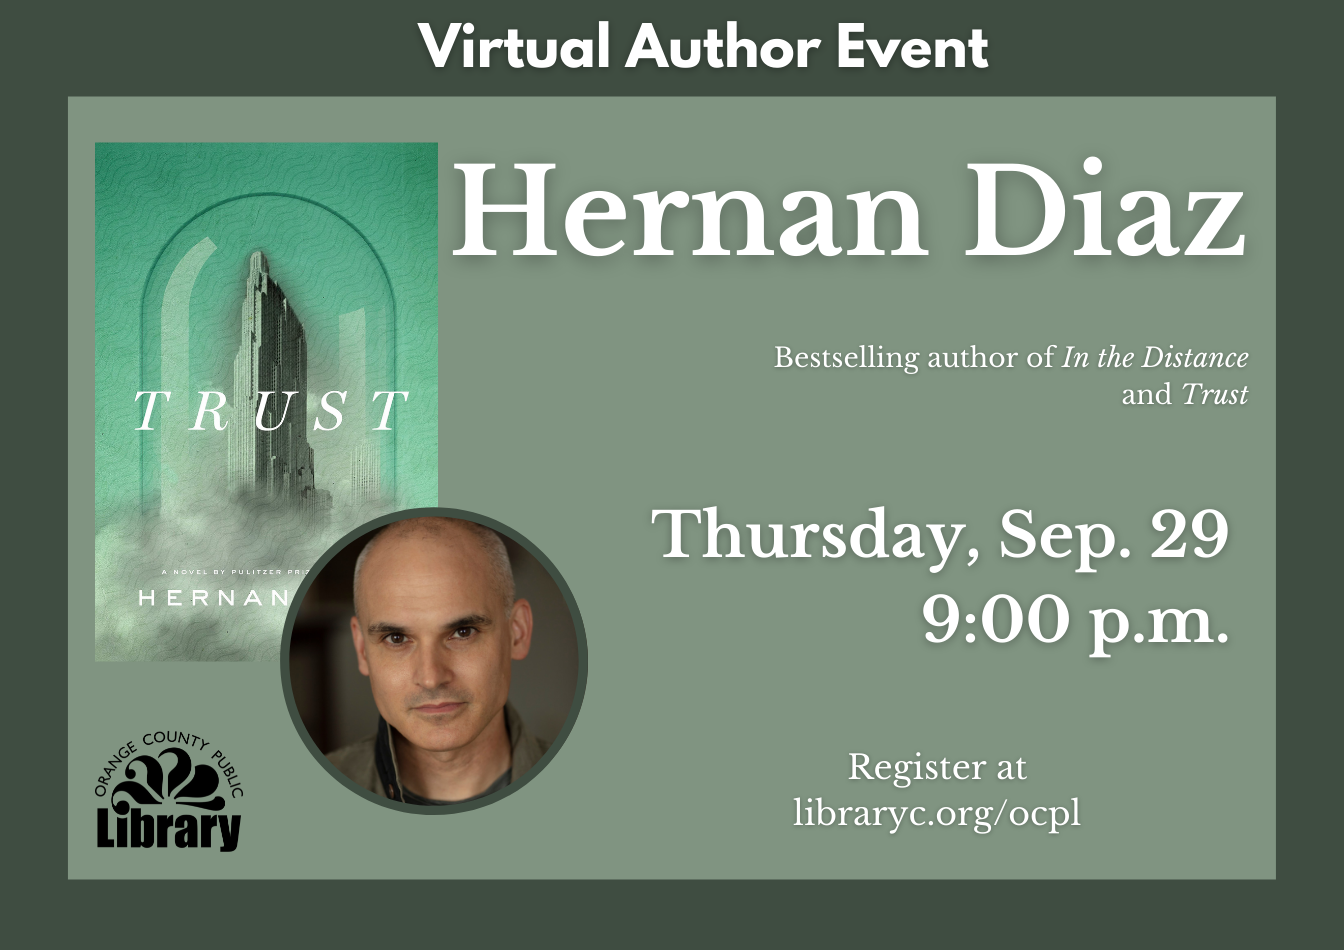 Widget for a virtual author event with Hernan Diaz